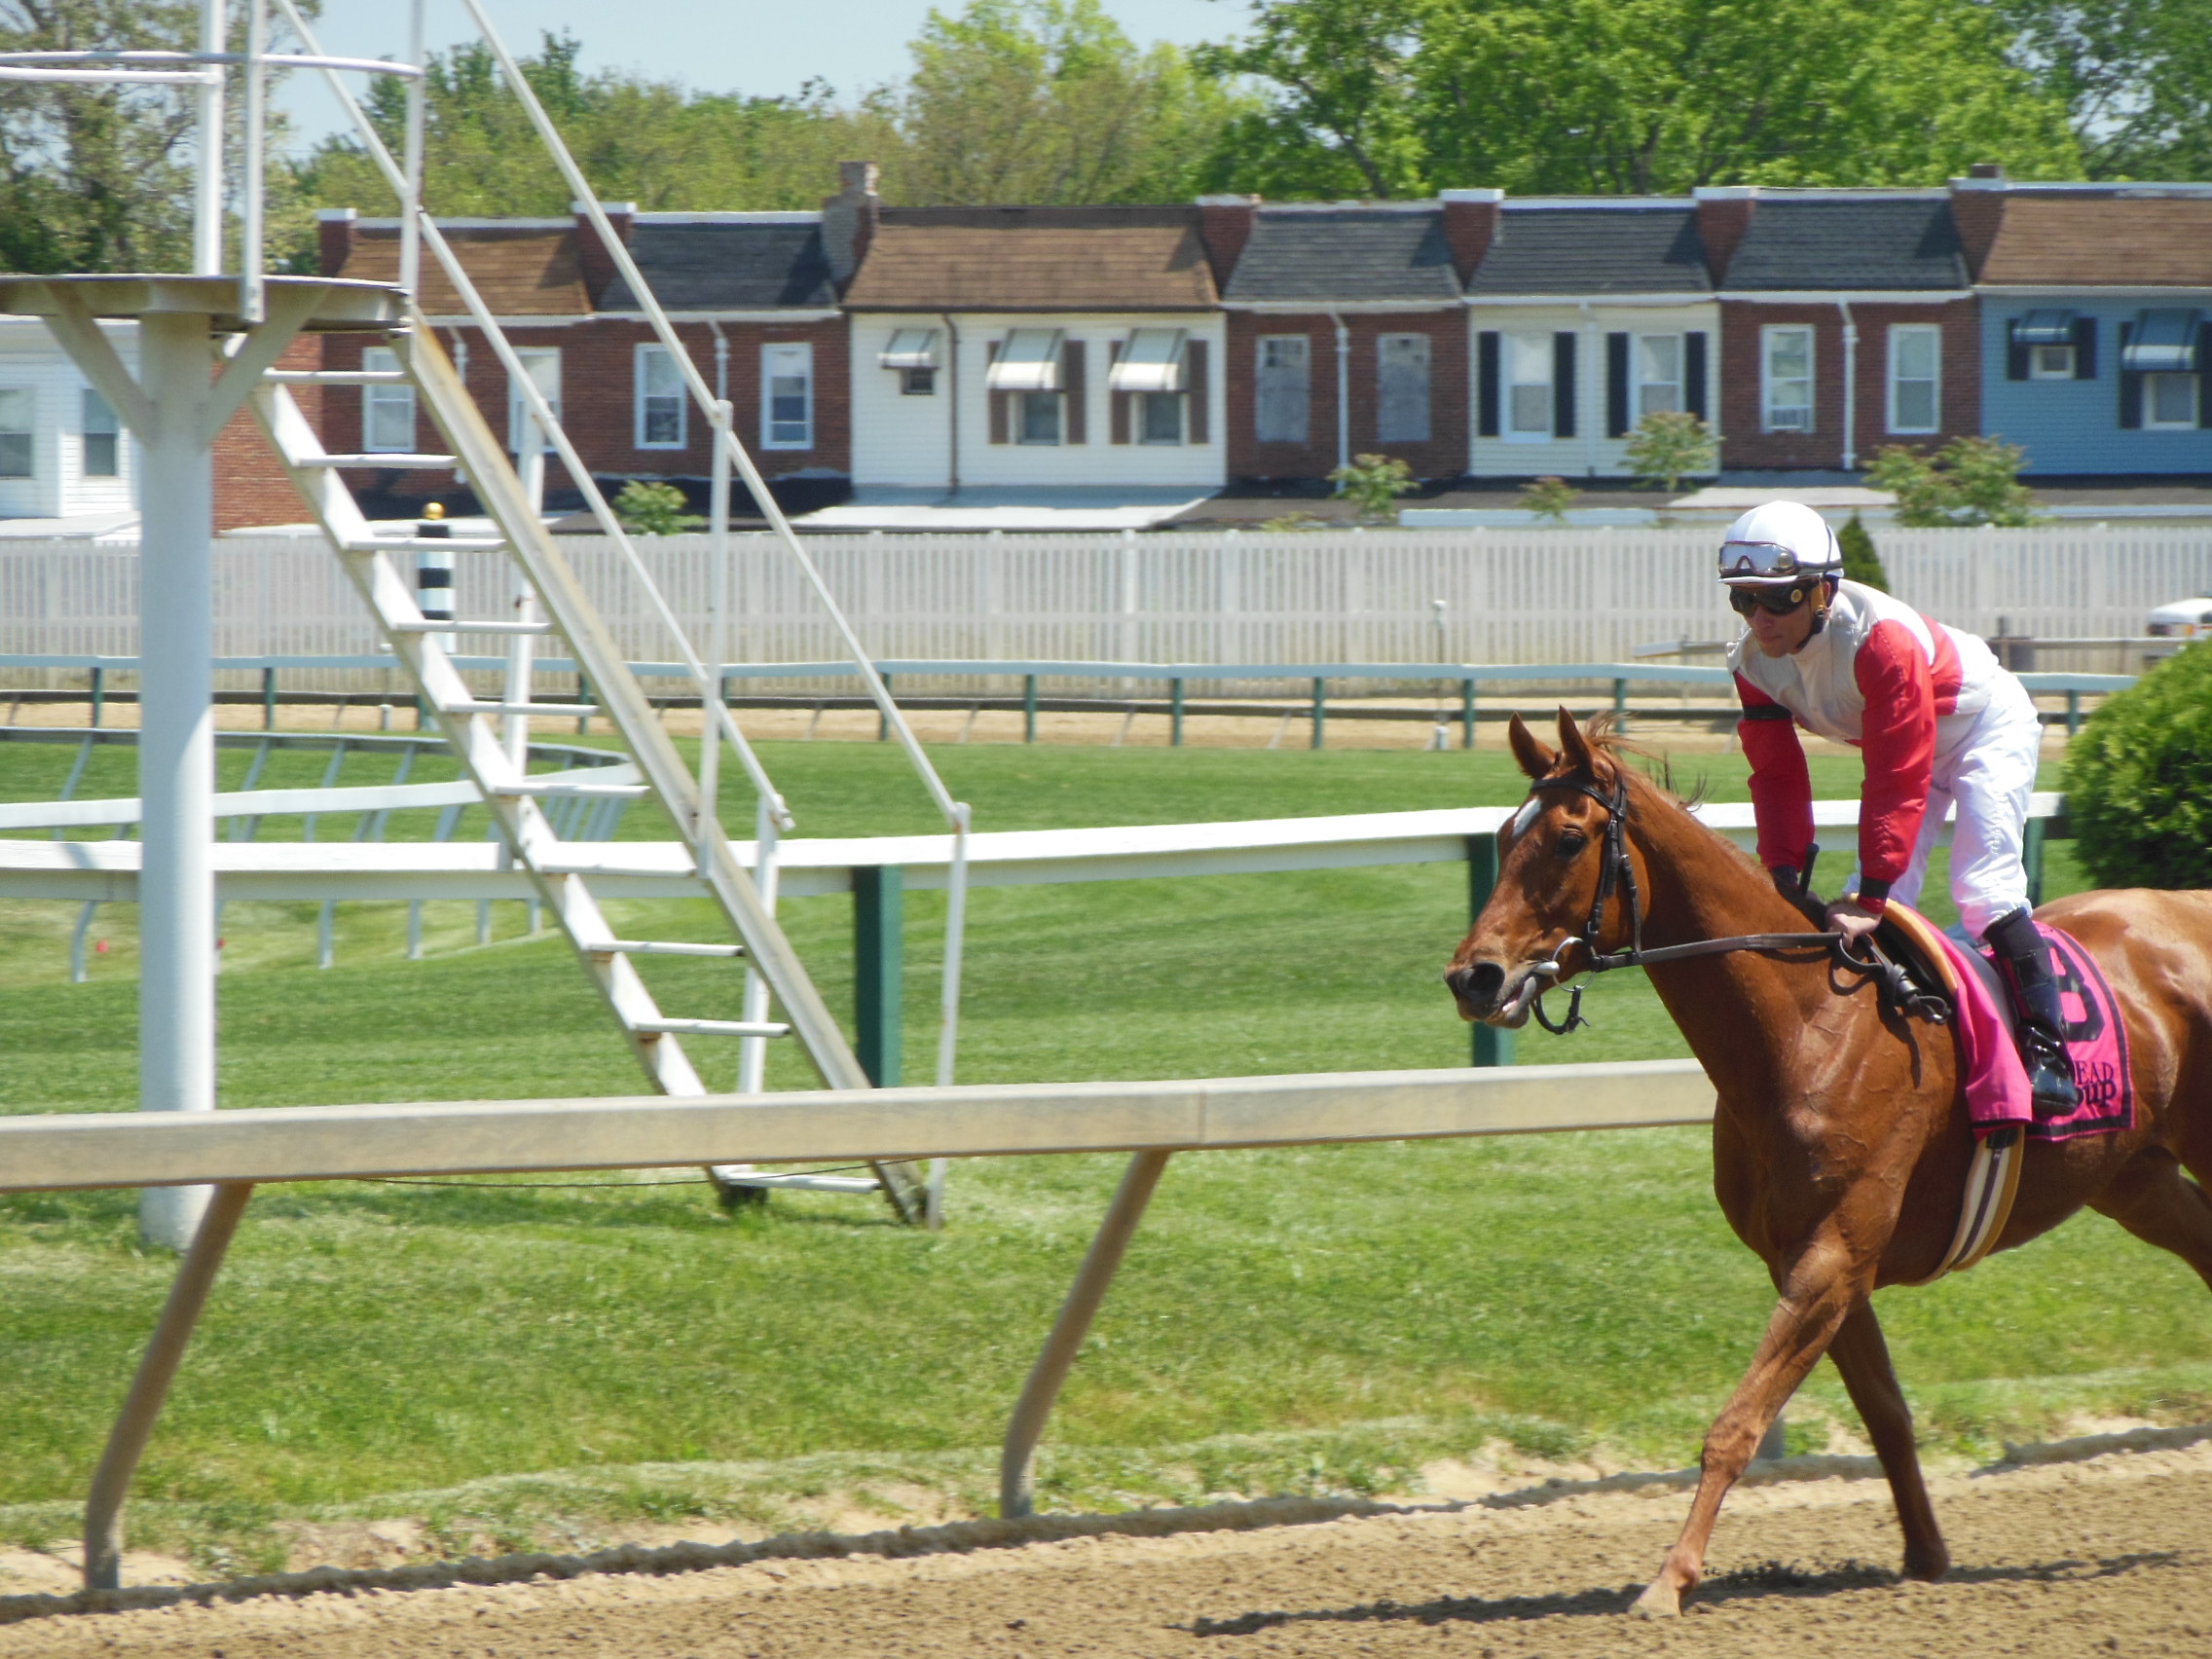 Pimlico redevelopment would significantly impact the communty surrounding the track. (Anthony C. Hayes)